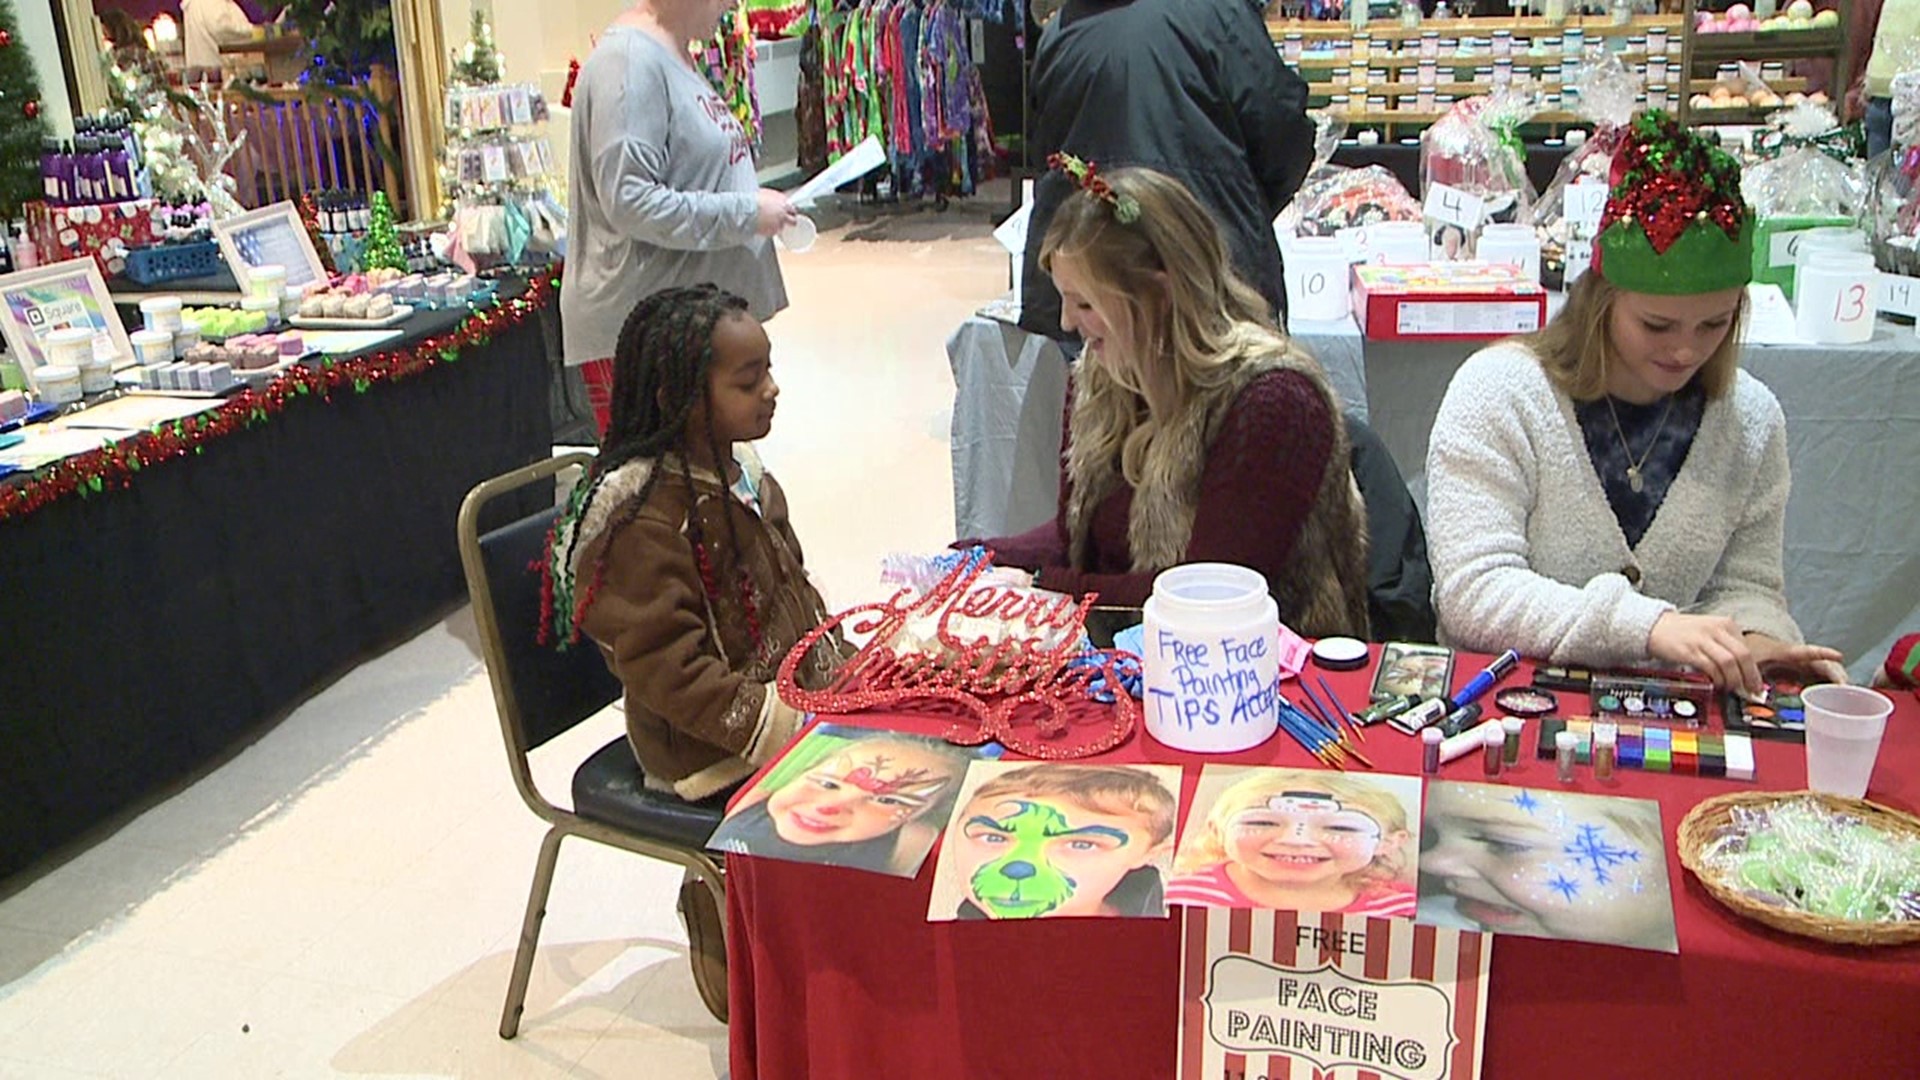 The holiday event held at the Tilbury Community Center featured dozens of vendors and activities for folks of all ages.